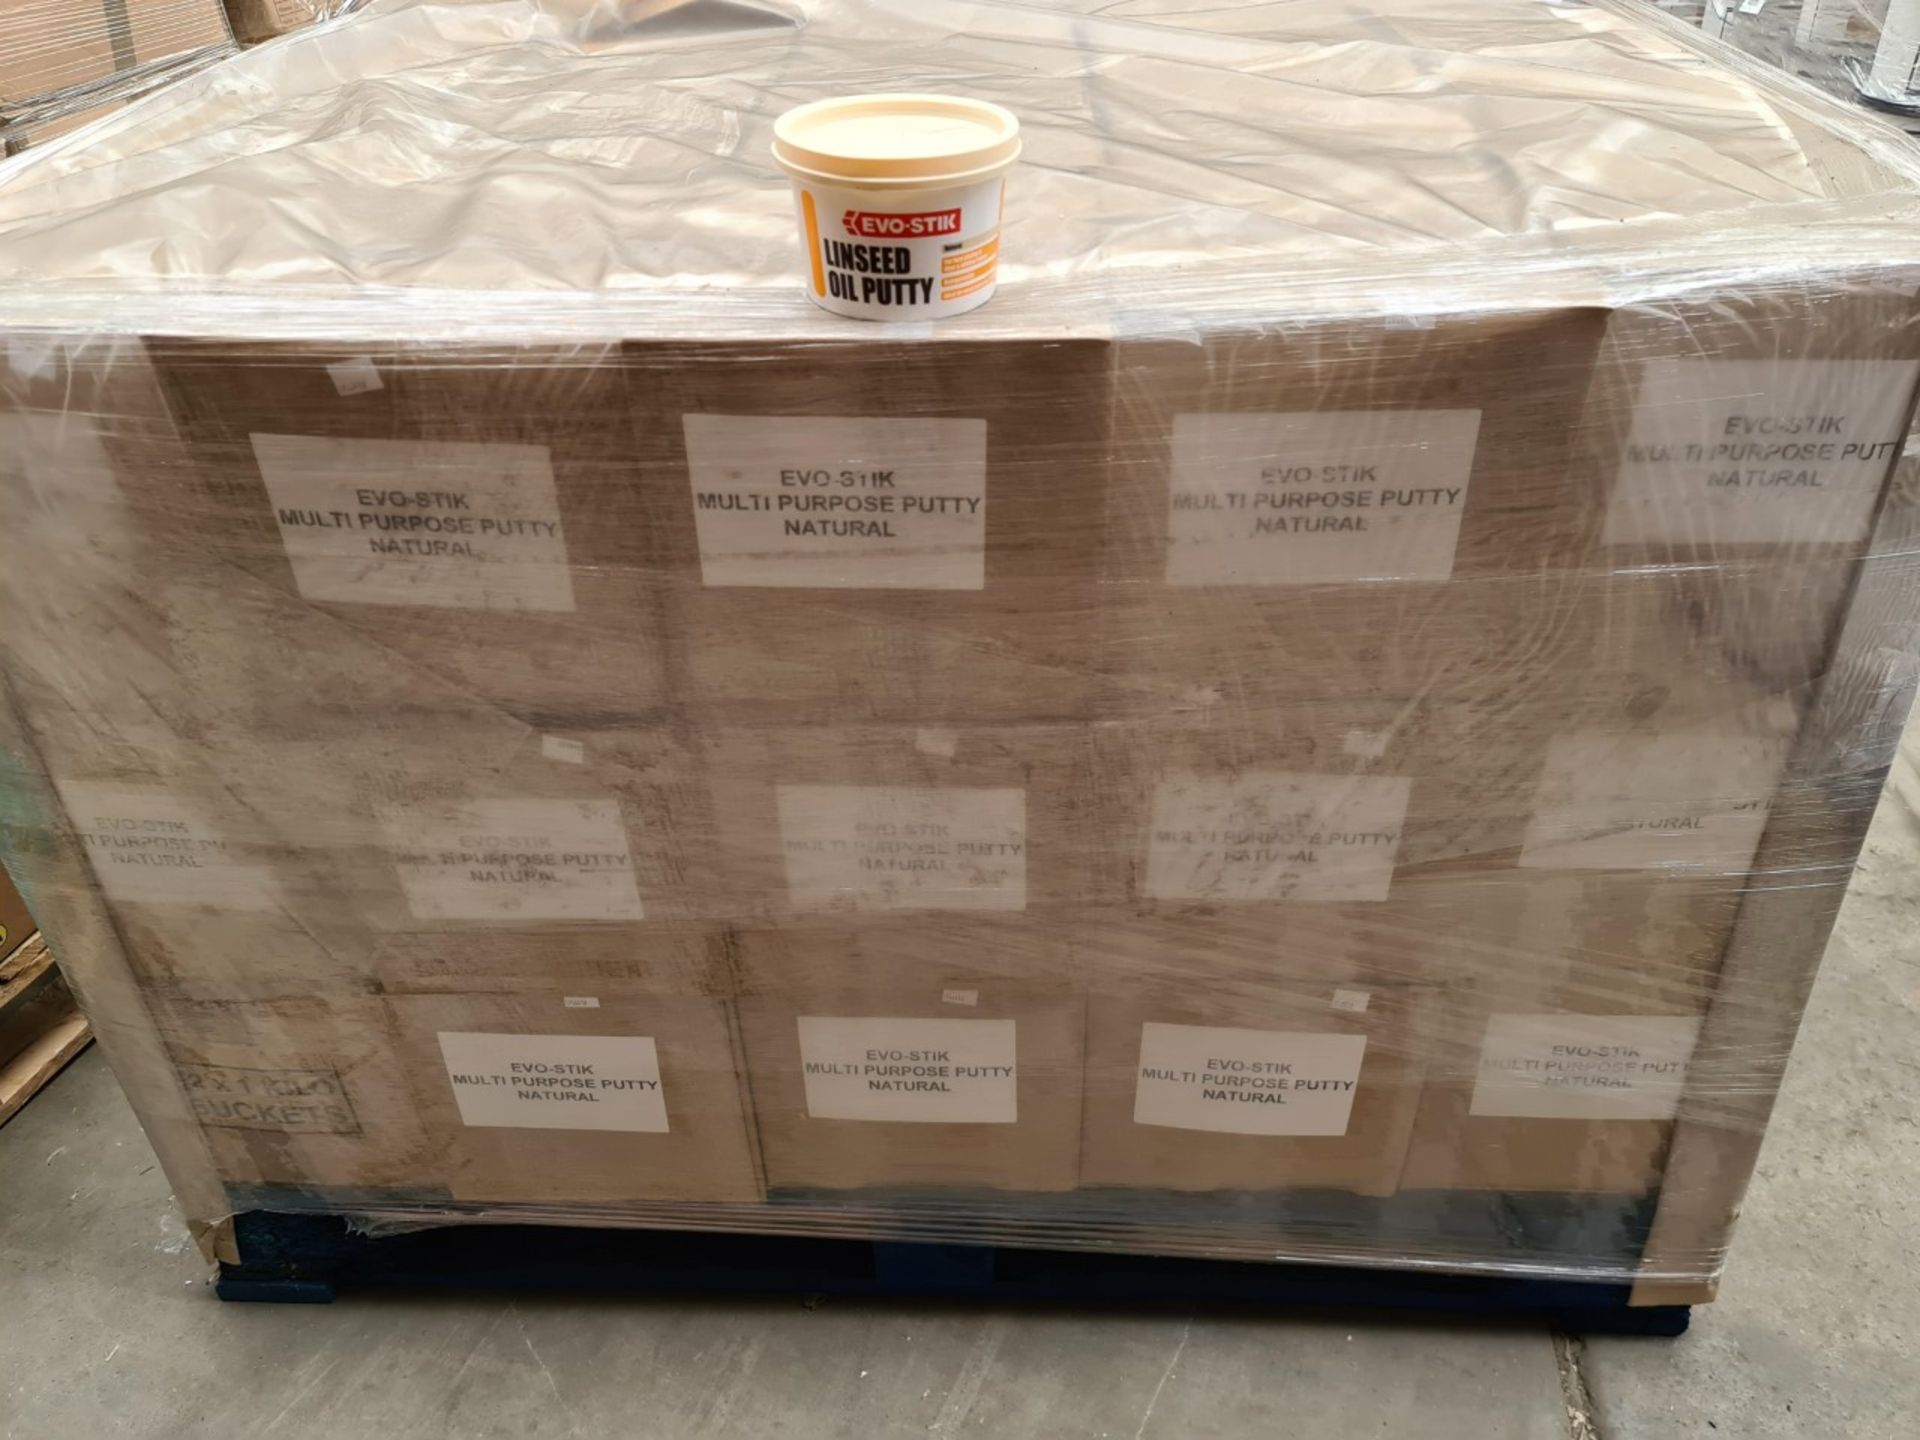 PALLET OF 720 x 1KG EVO-STIK LINSEED OIL PUTTY. RRP £12.99 PER TUB - Image 3 of 3